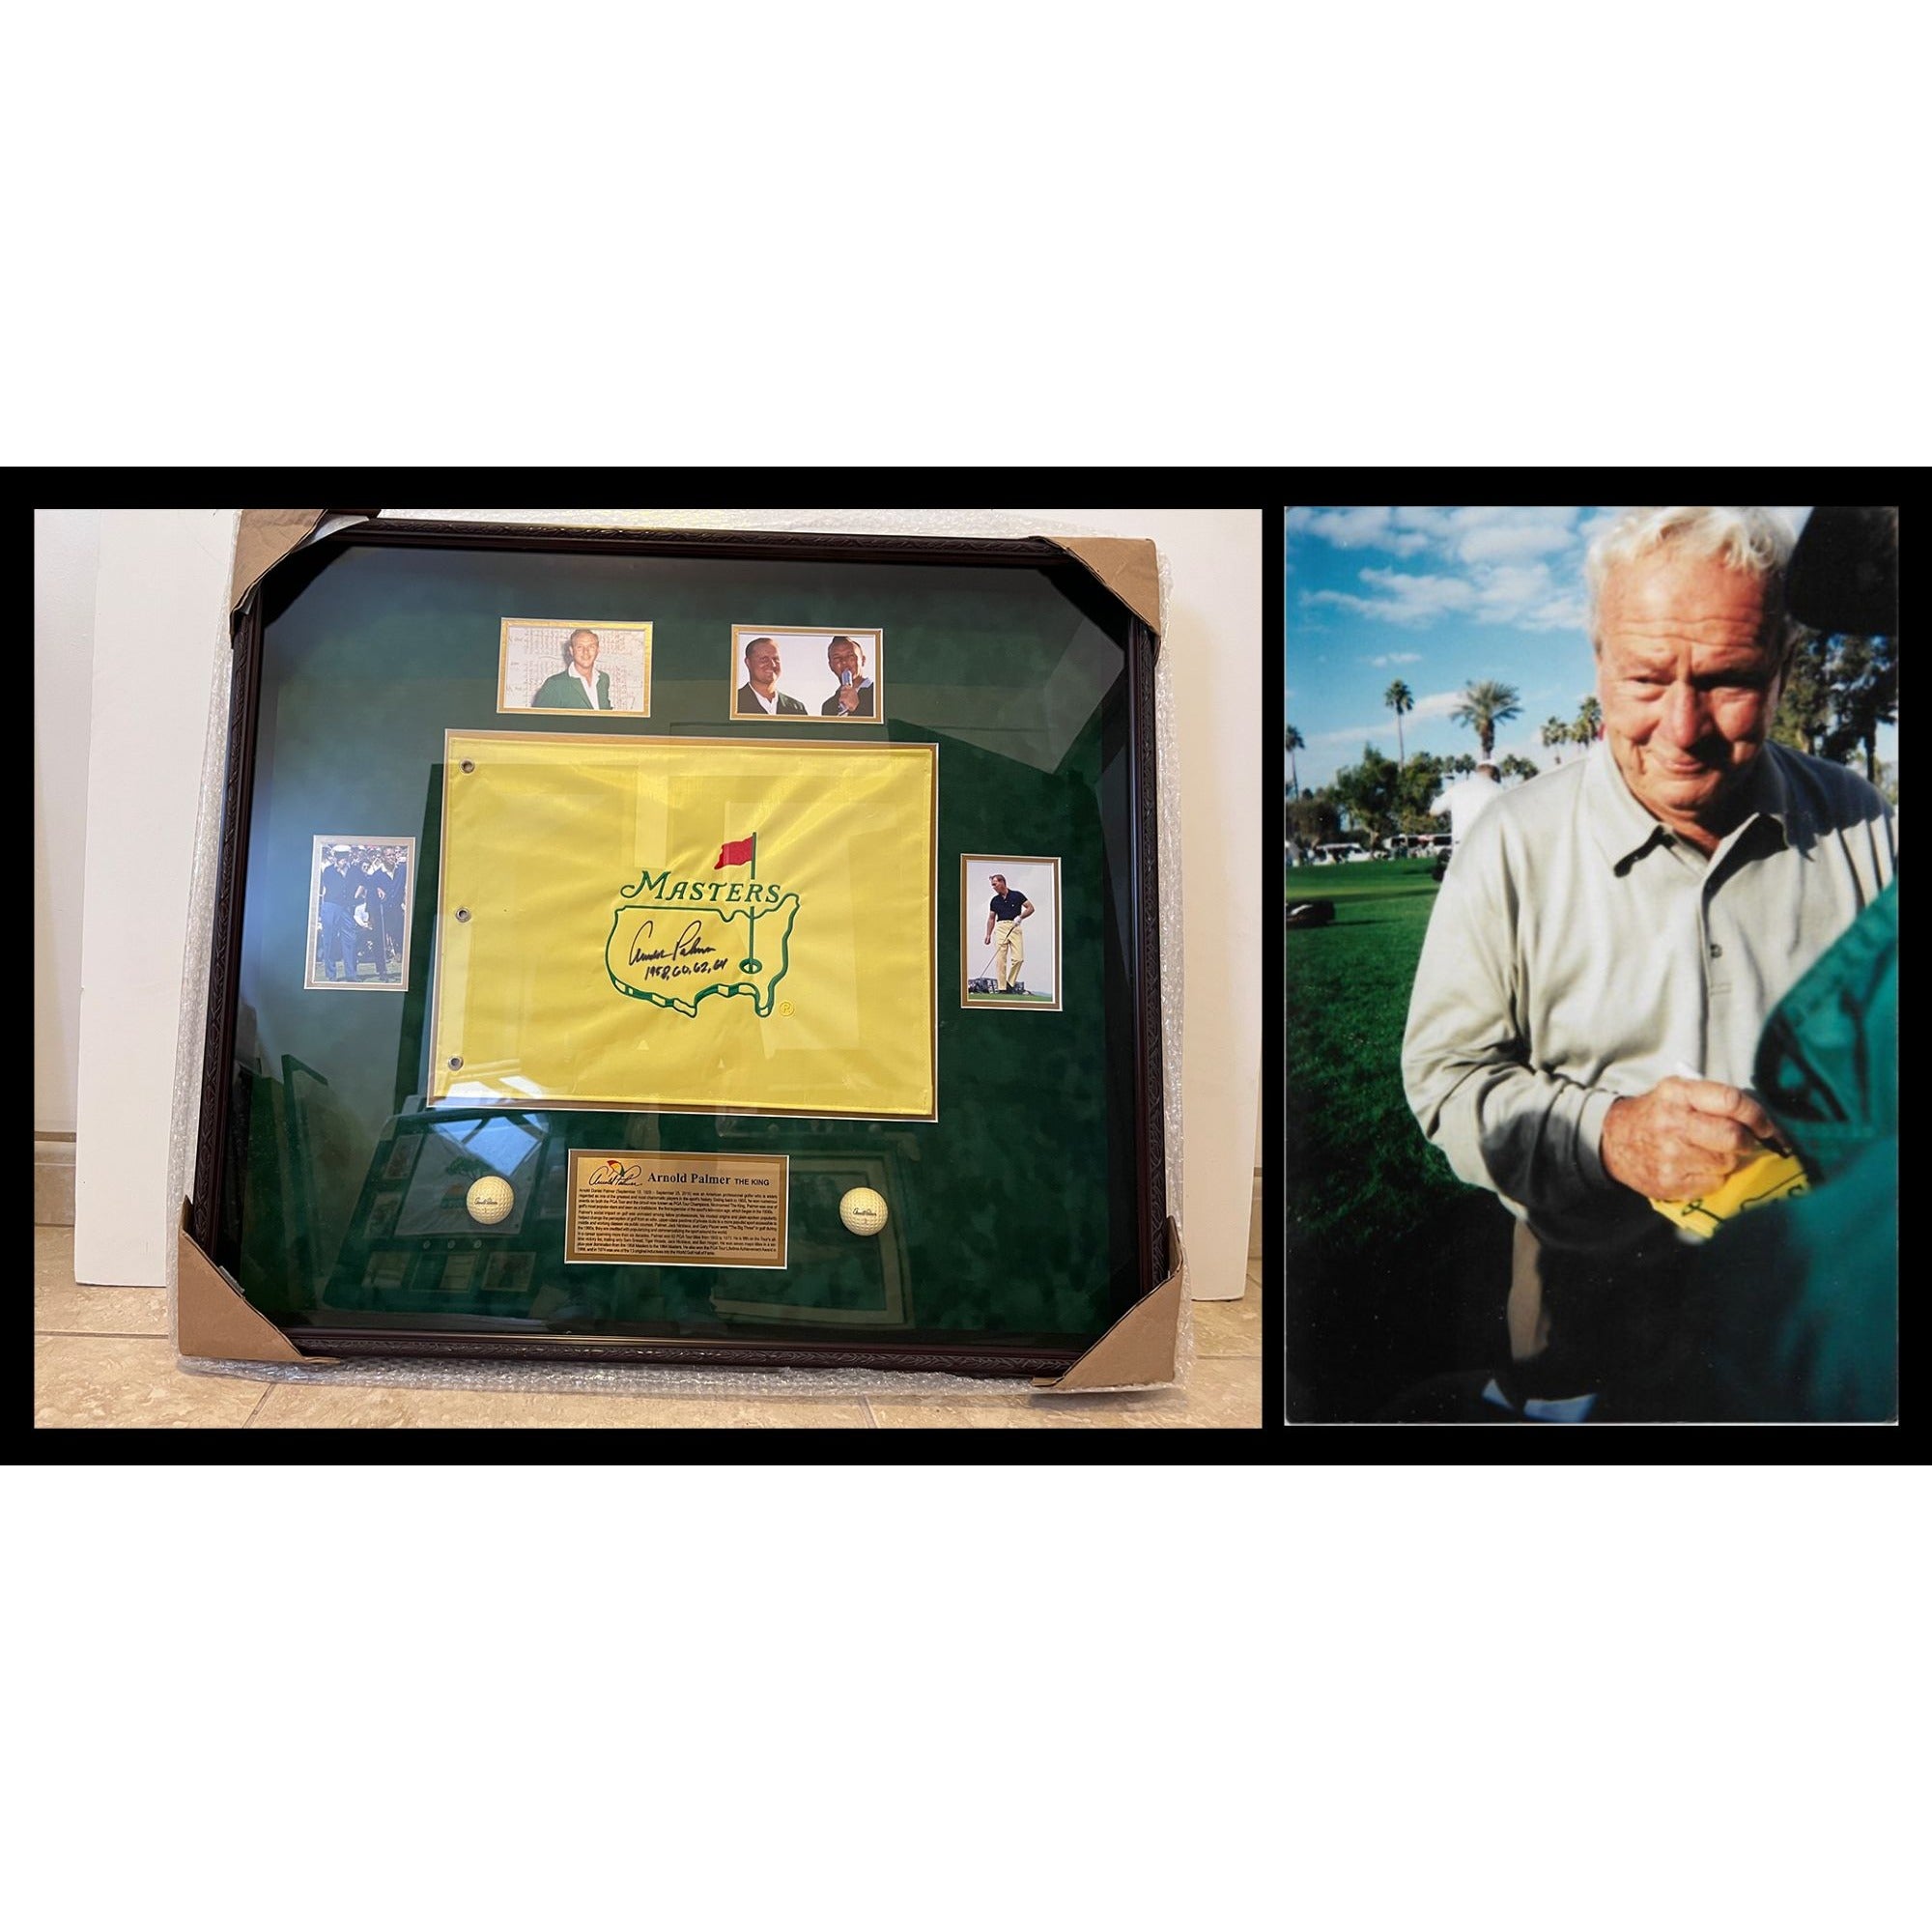 Arnold Palmer Masters pin flag framed 30x34 signed and inscribed with proof